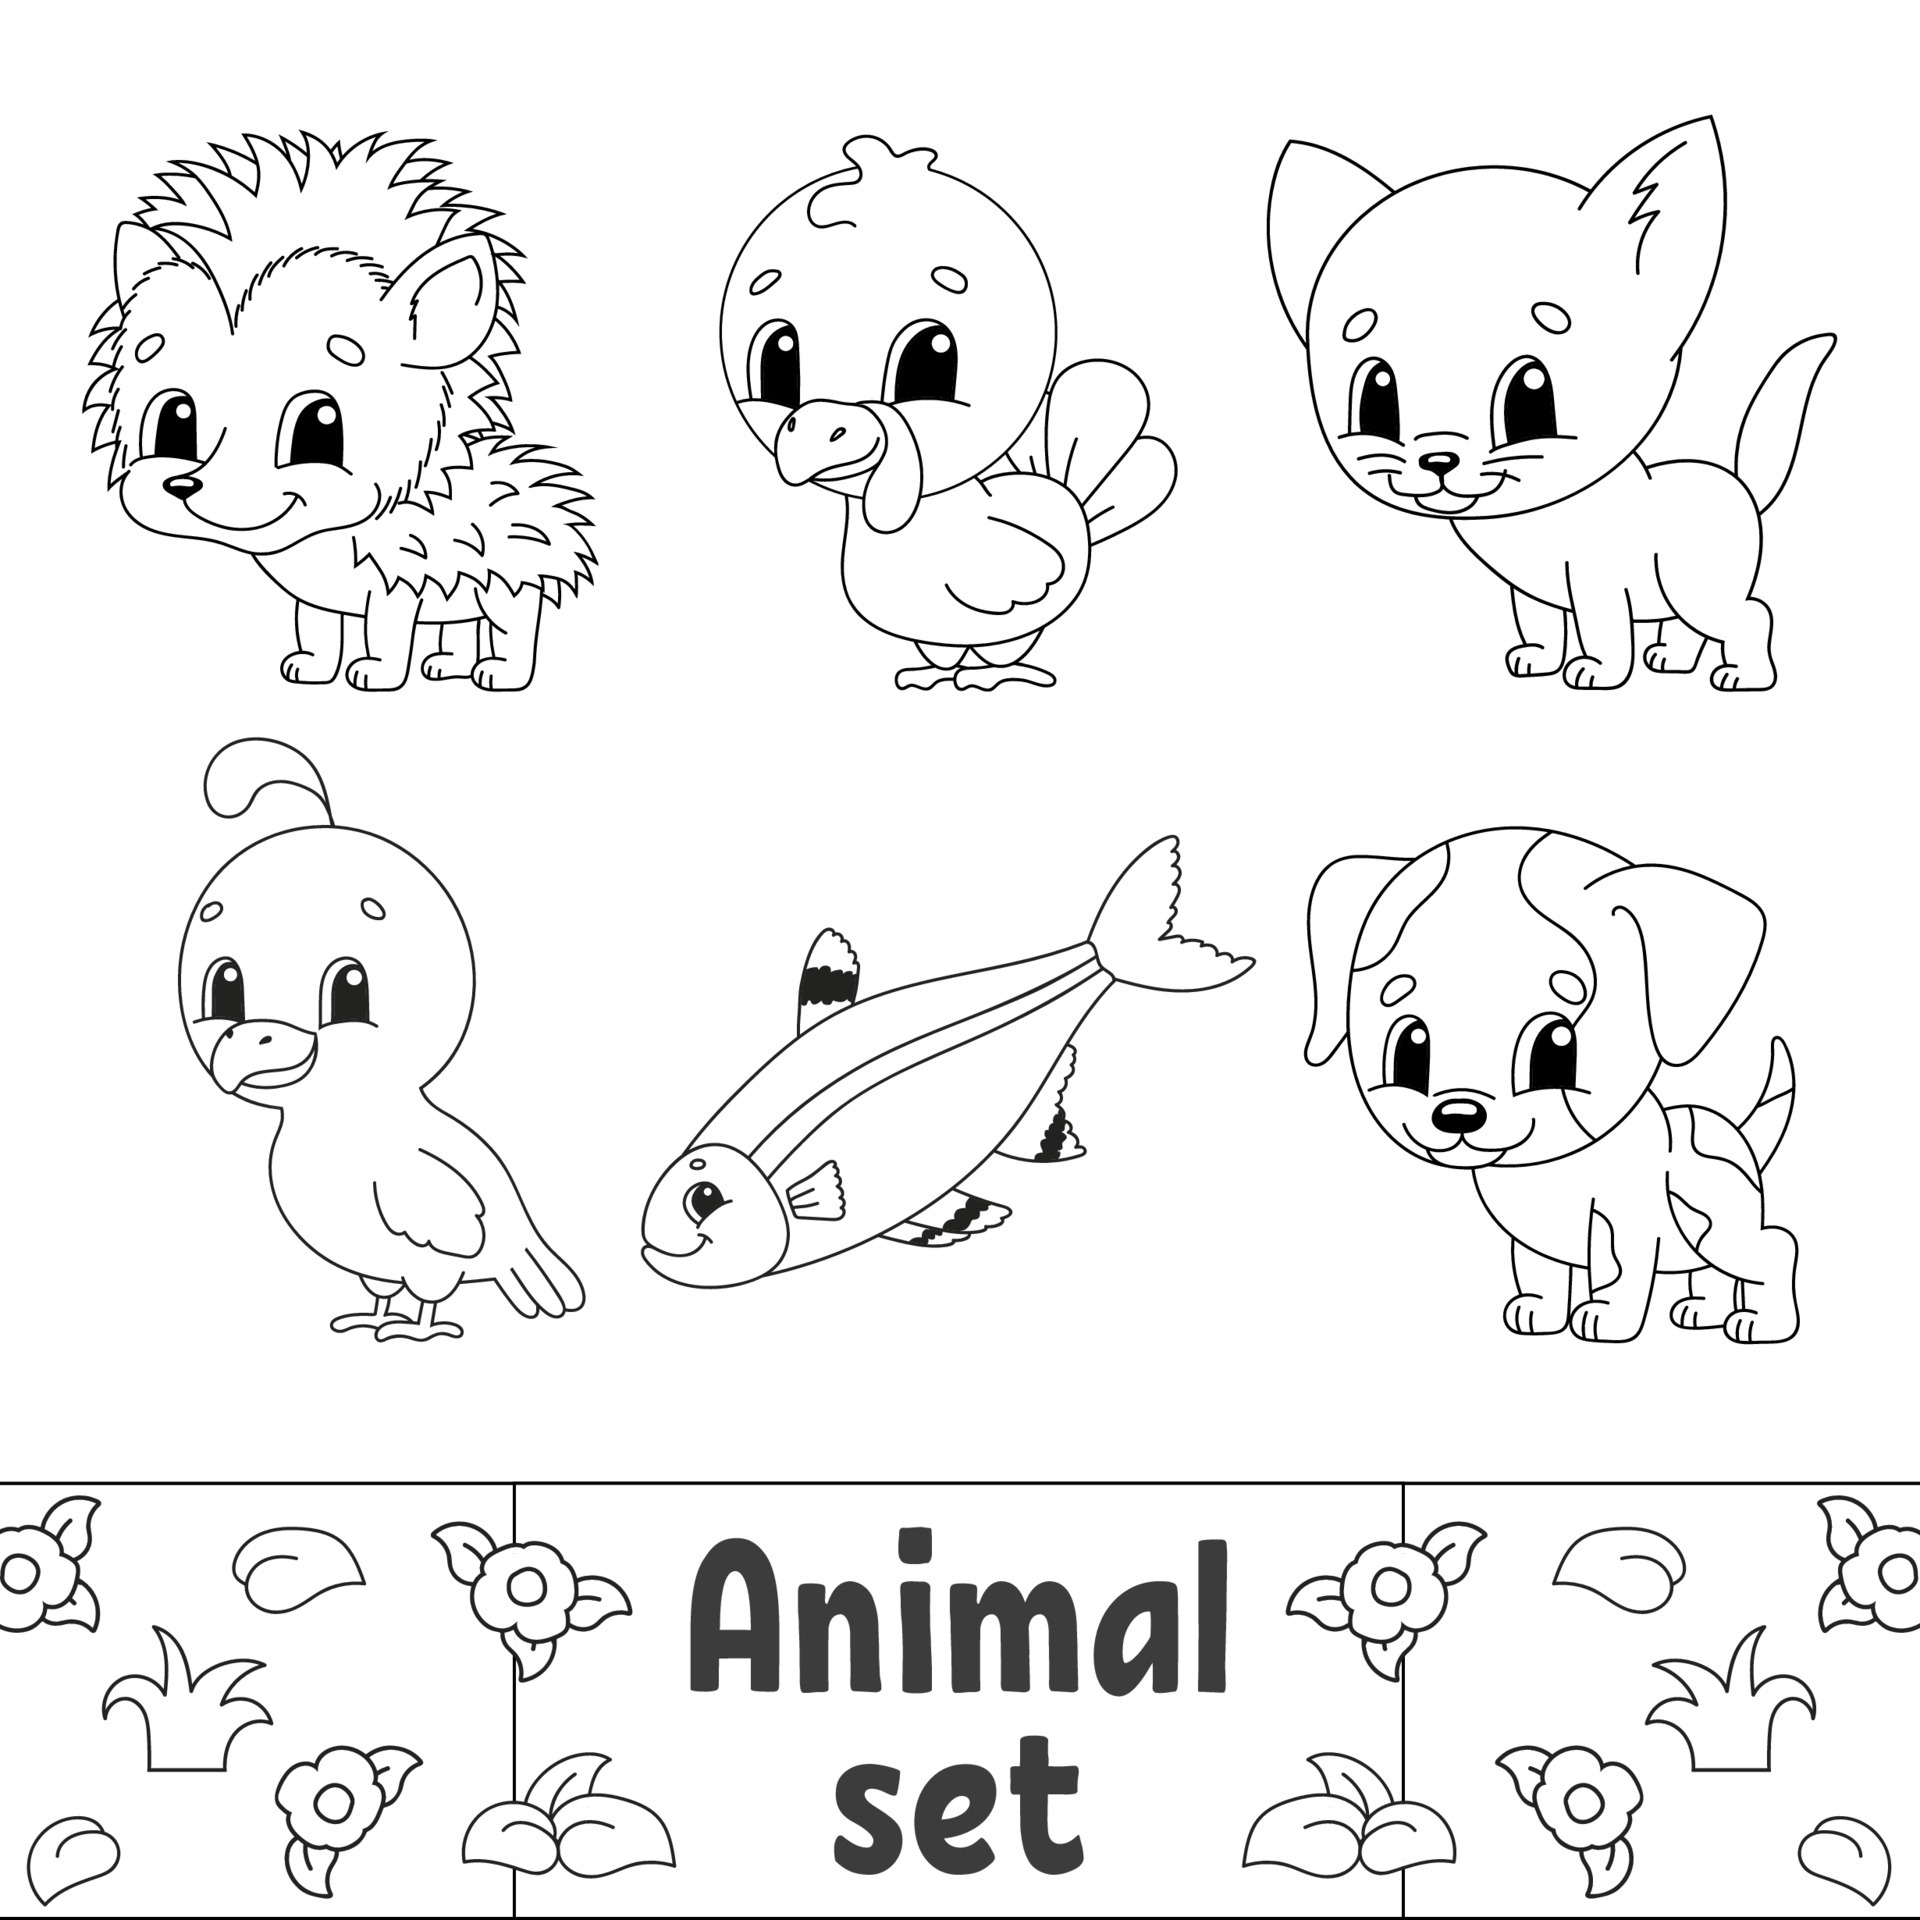 Coloring book for kids. Animal clipart. Cheerful characters ...